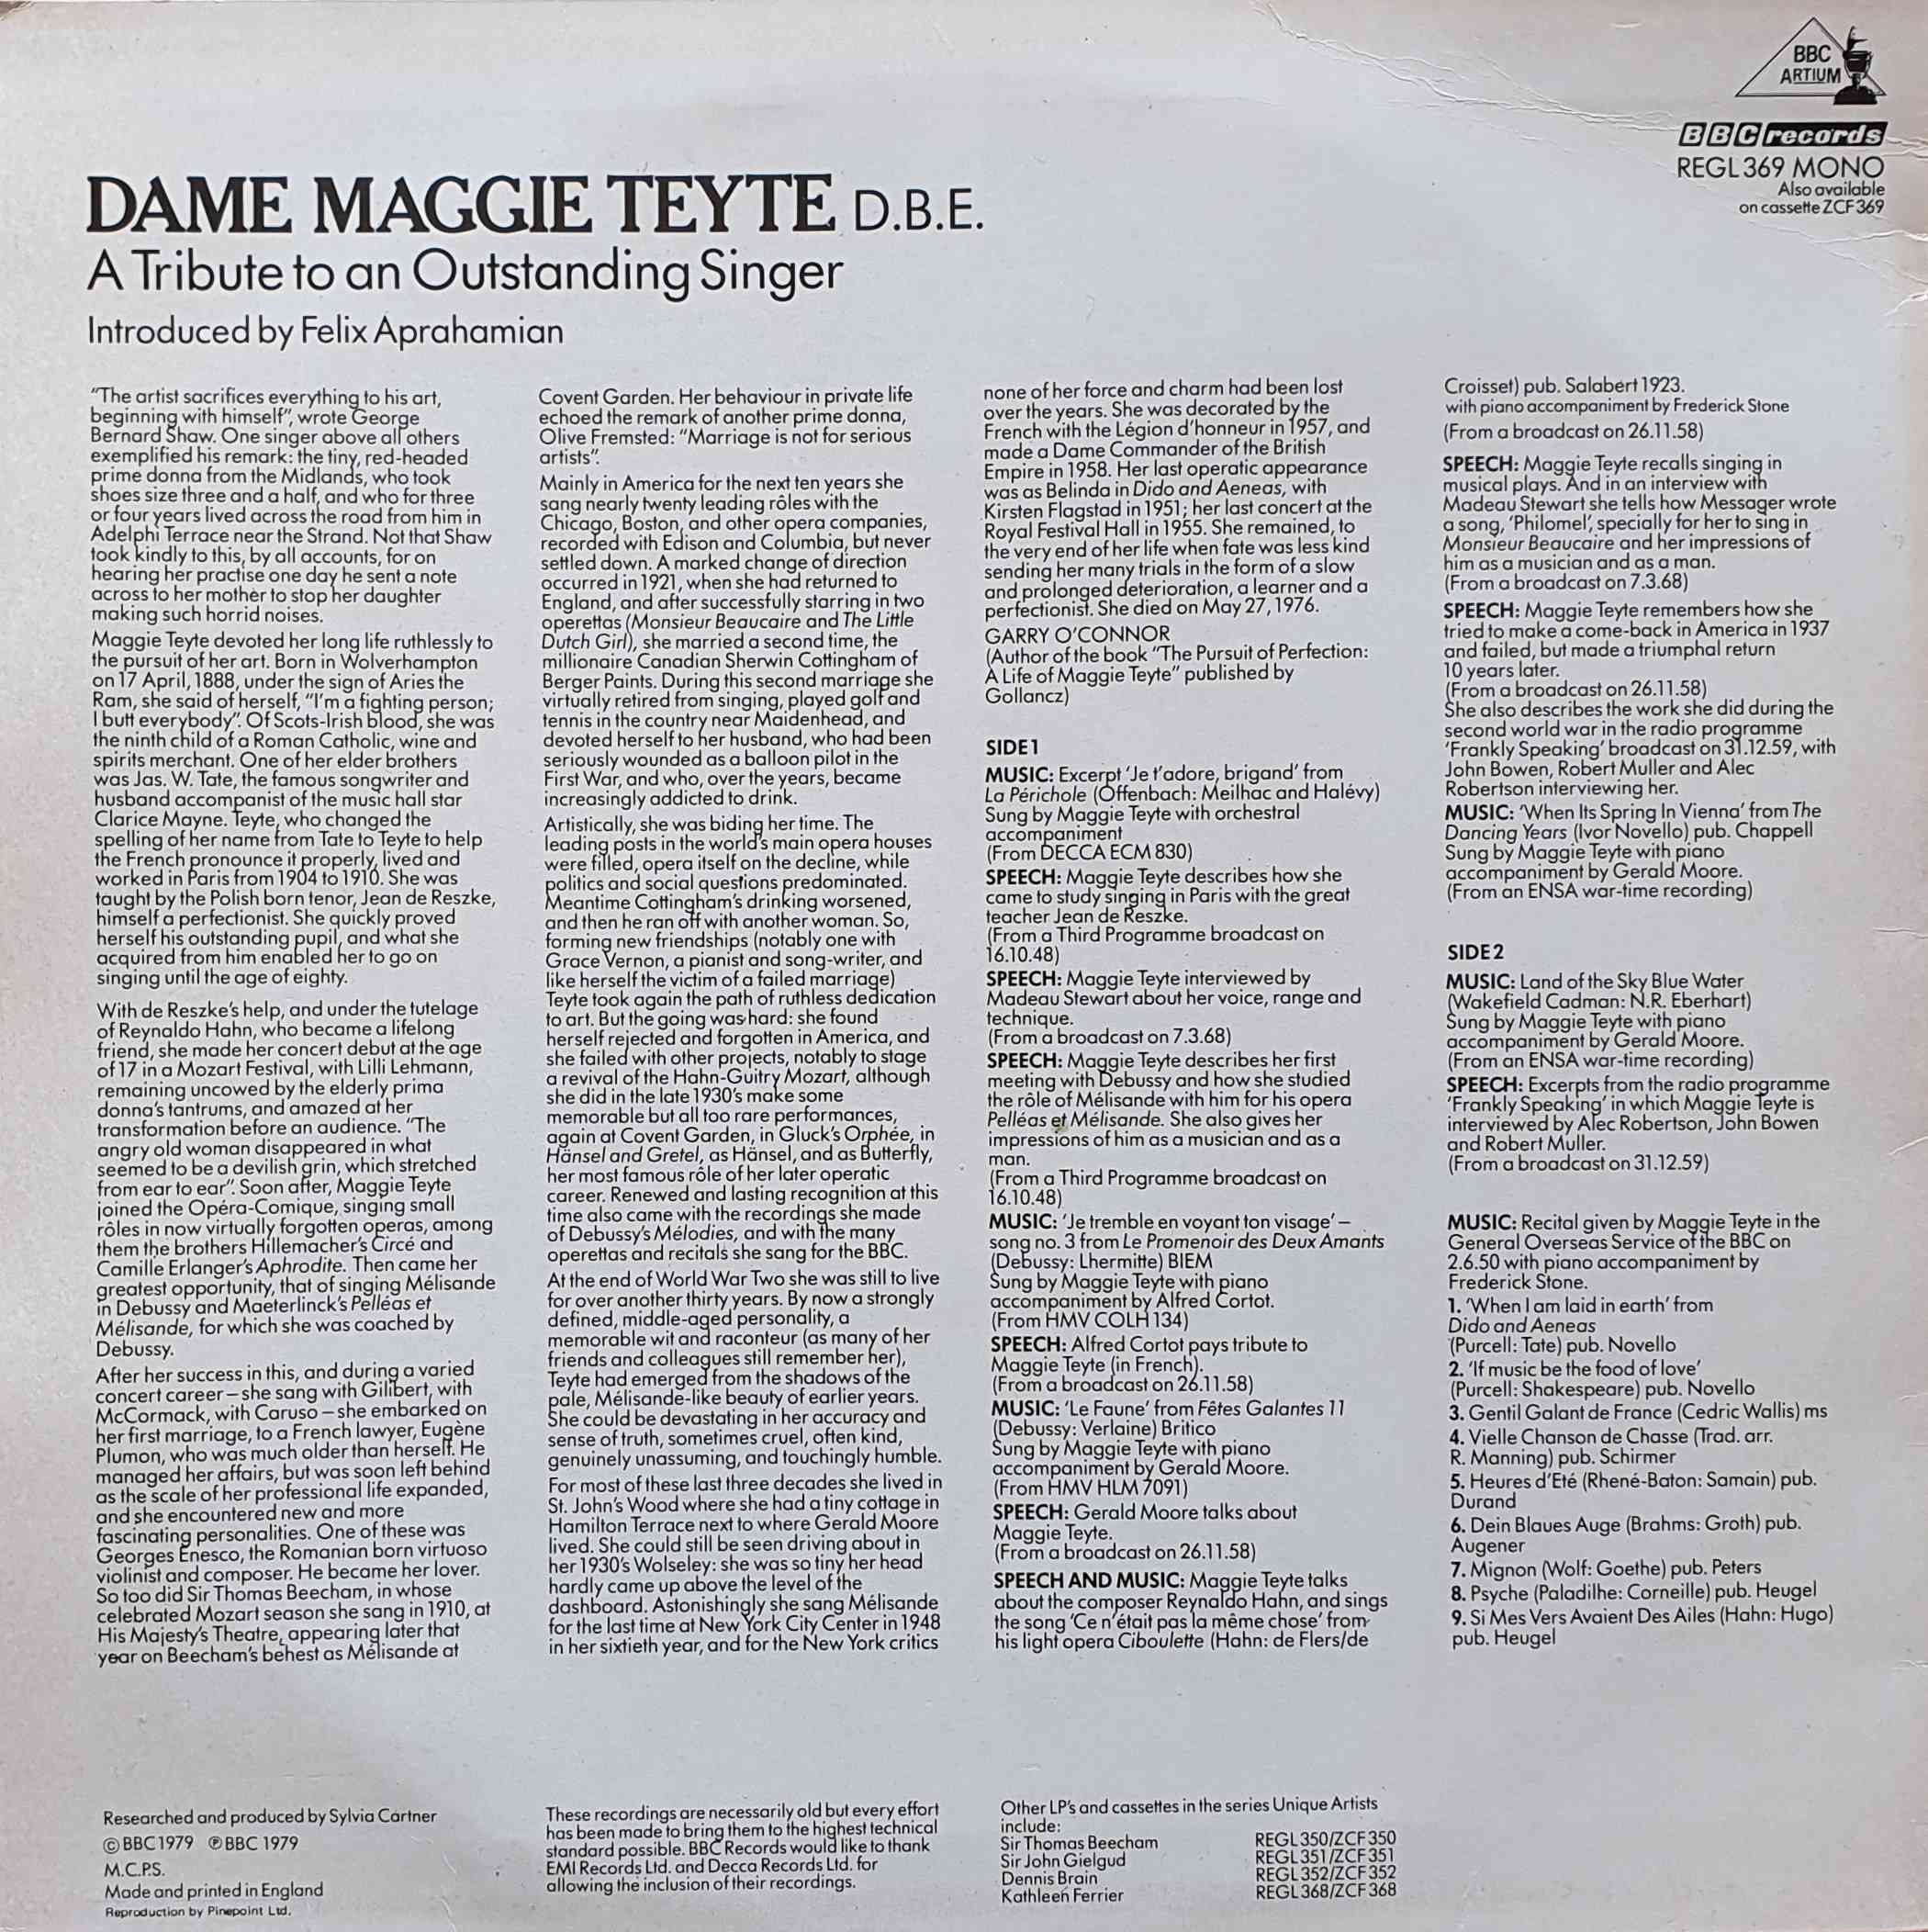 Picture of REGL 369 Dame Maggie Teyte by artist Dame Maggie Teyte from the BBC records and Tapes library